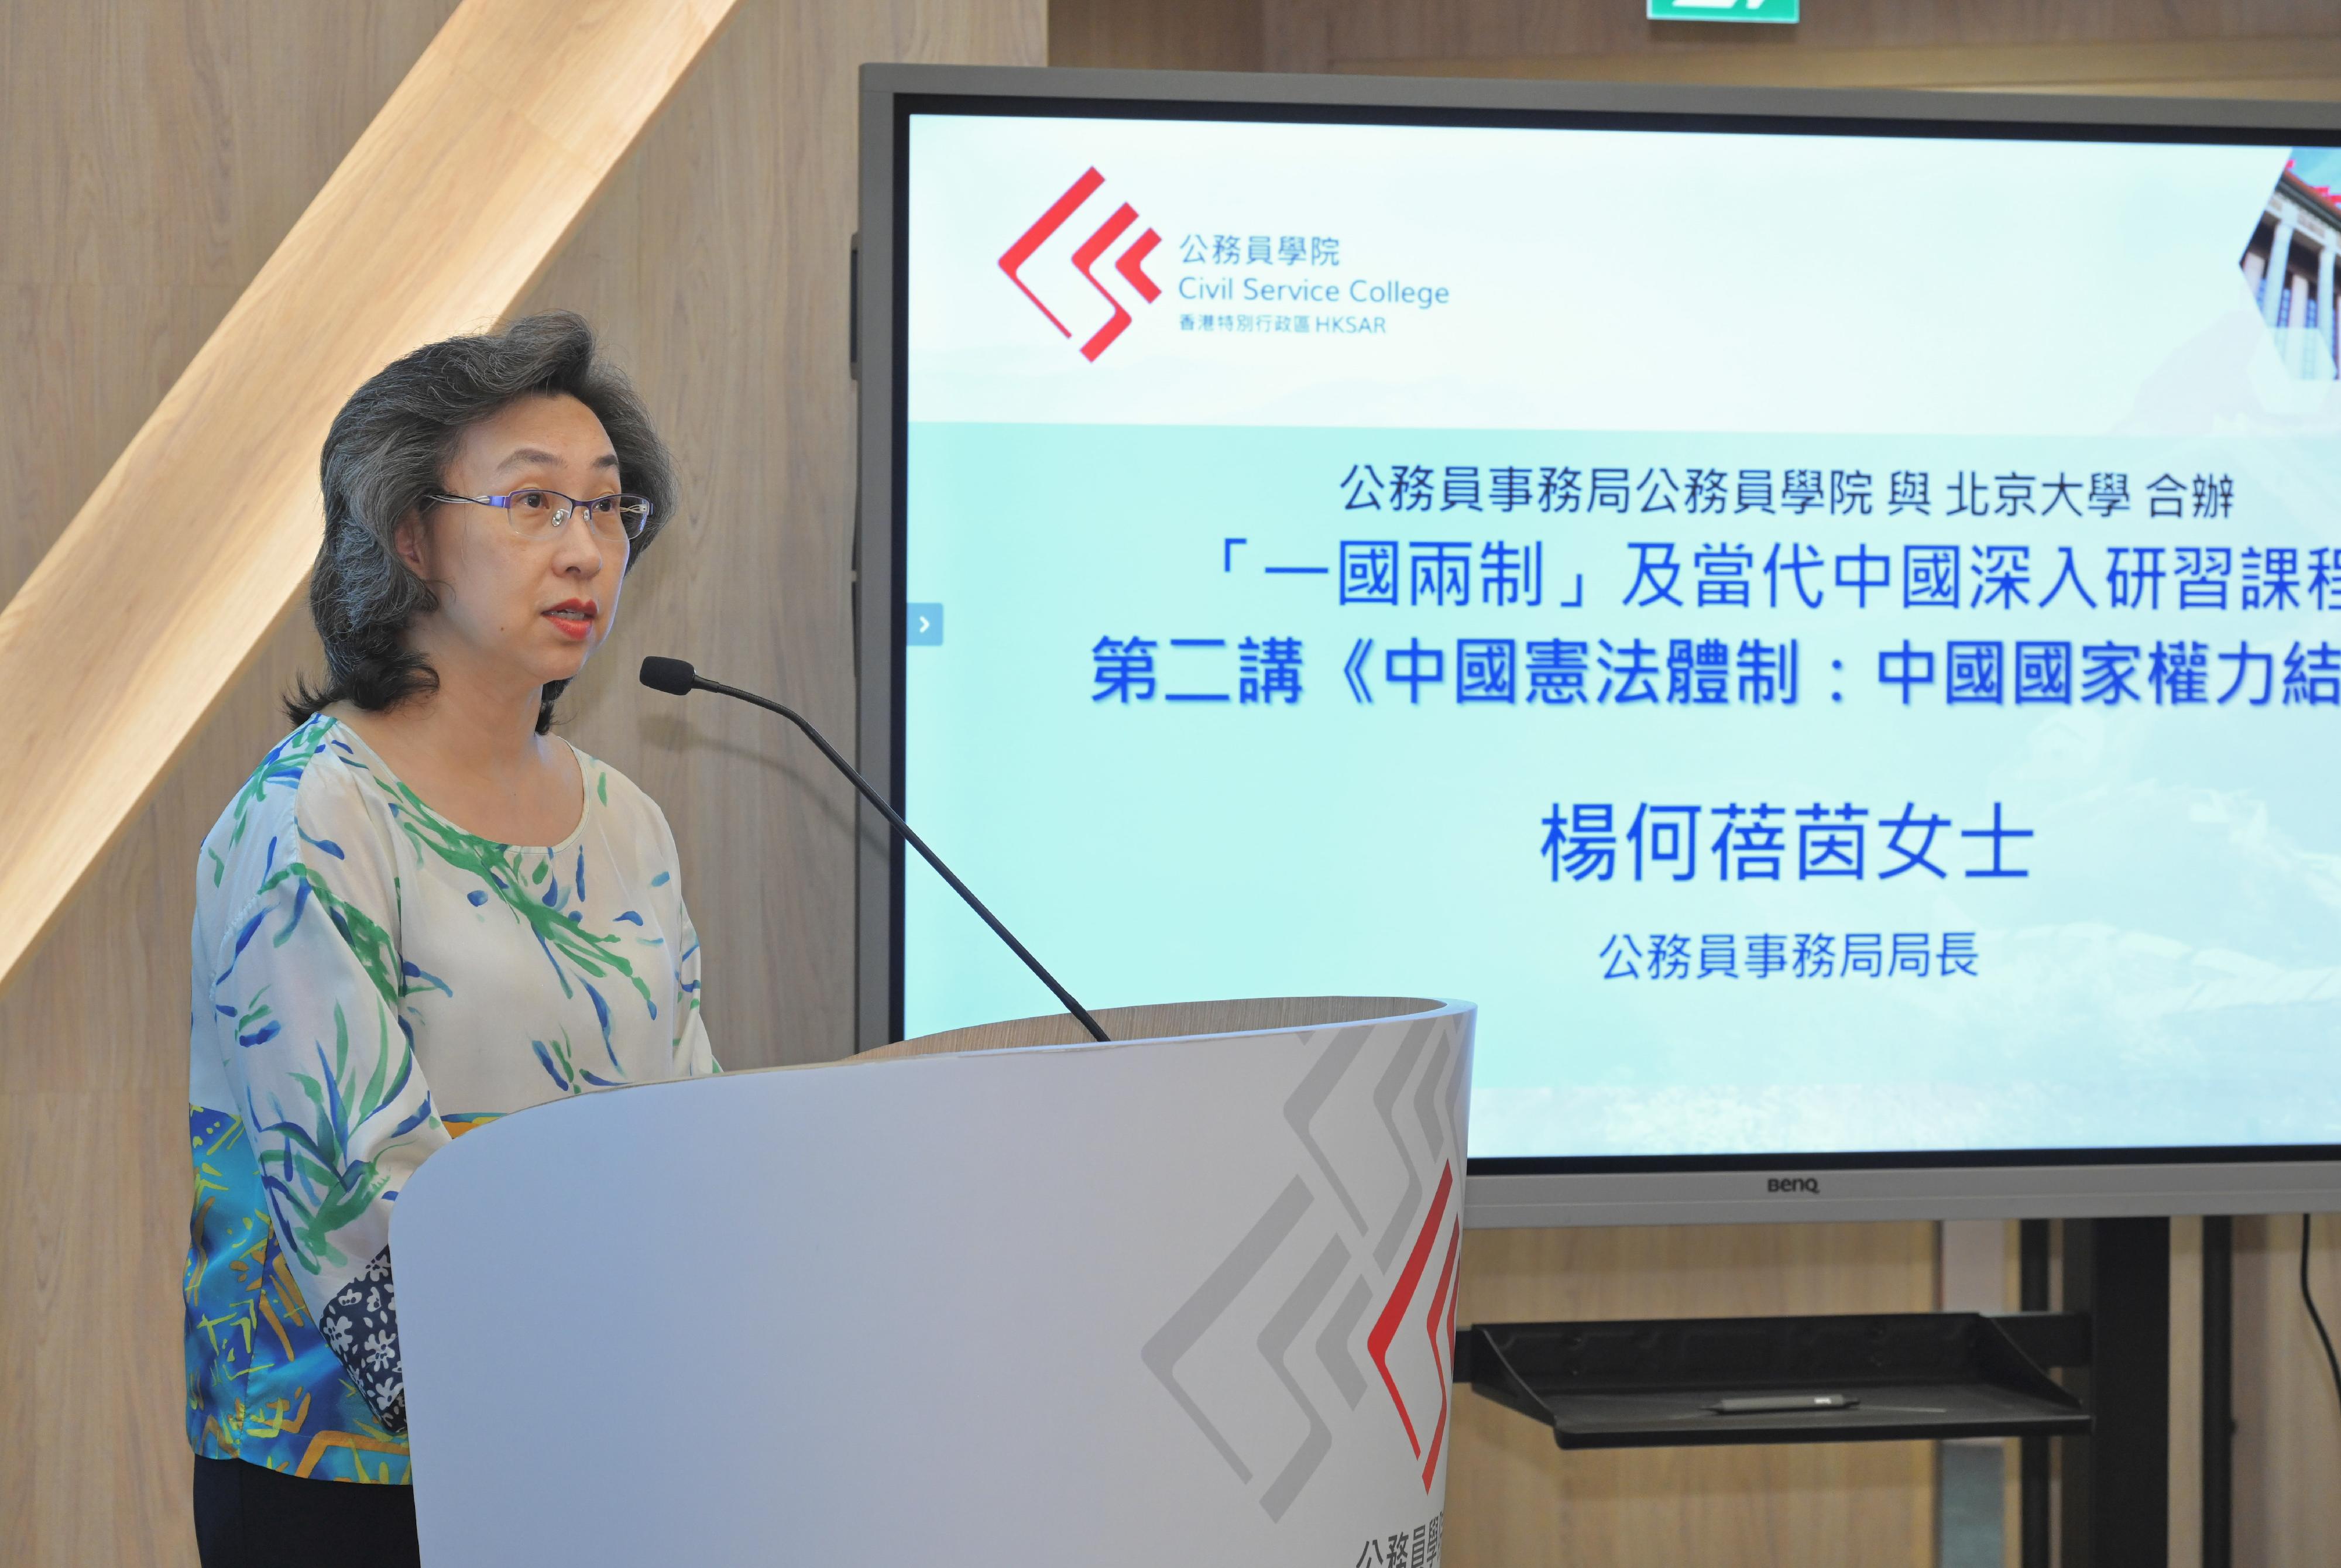 The Civil Service College of the Civil Service Bureau, in collaboration with the Institute for Hong Kong and Macau Studies, Peking University, launched an in-depth programme on "one country, two systems" and the contemporary China and organised a lecture on the topic of "The Chinese Constitutional System: the Country's Authority Structure" today (August 22). Photo shows the Secretary for the Civil Service, Mrs Ingrid Yeung, addressing the lecture.